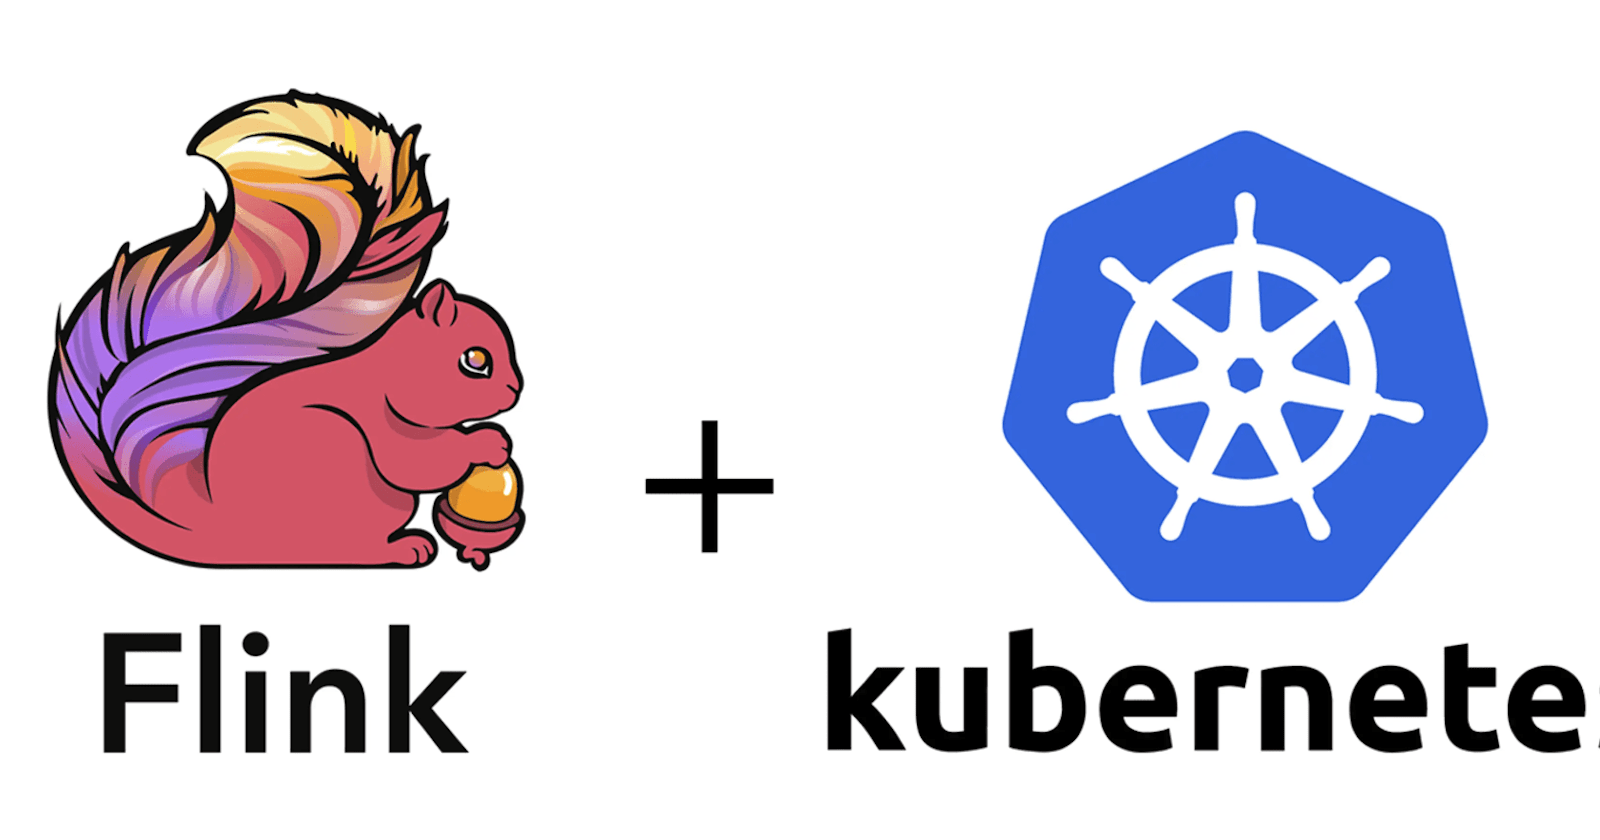 Exploring Apache Flink Application Lifecycle Management with Kubernetes Operator